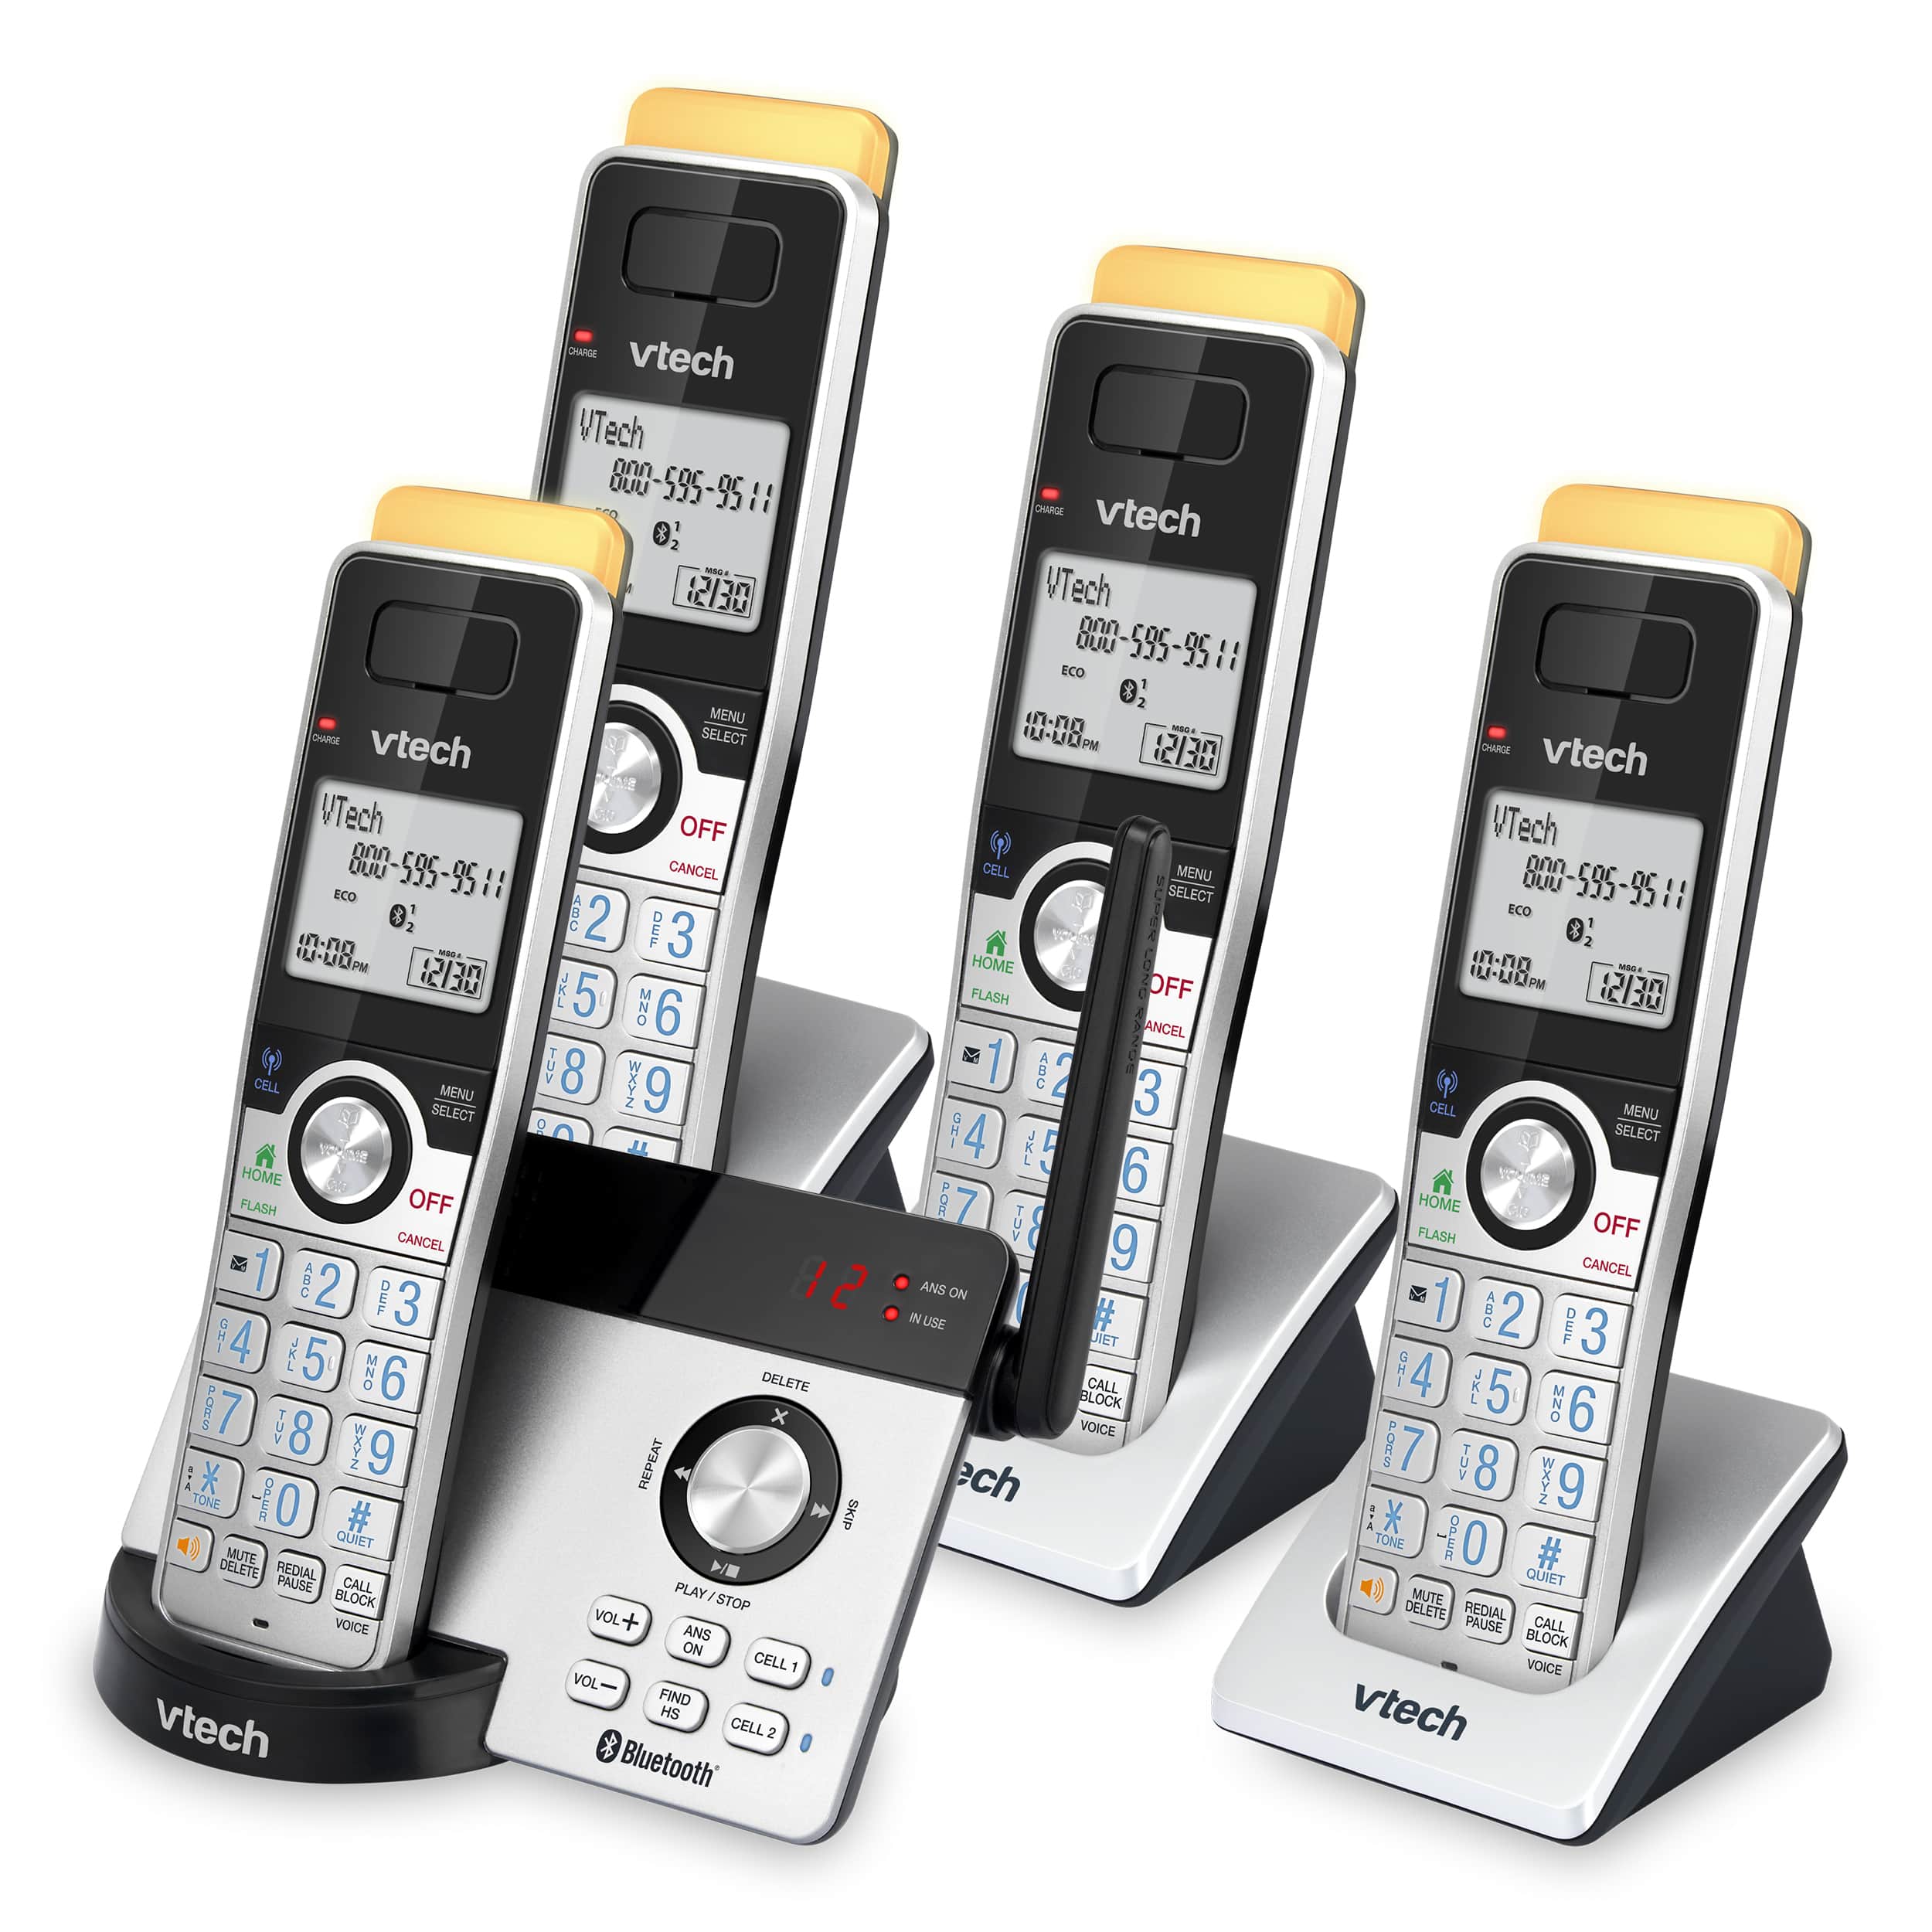 4-Handset Expandable Cordless Phone with Super Long Range, Bluetooth Connect to Cell, Smart Call Blocker and Answering System